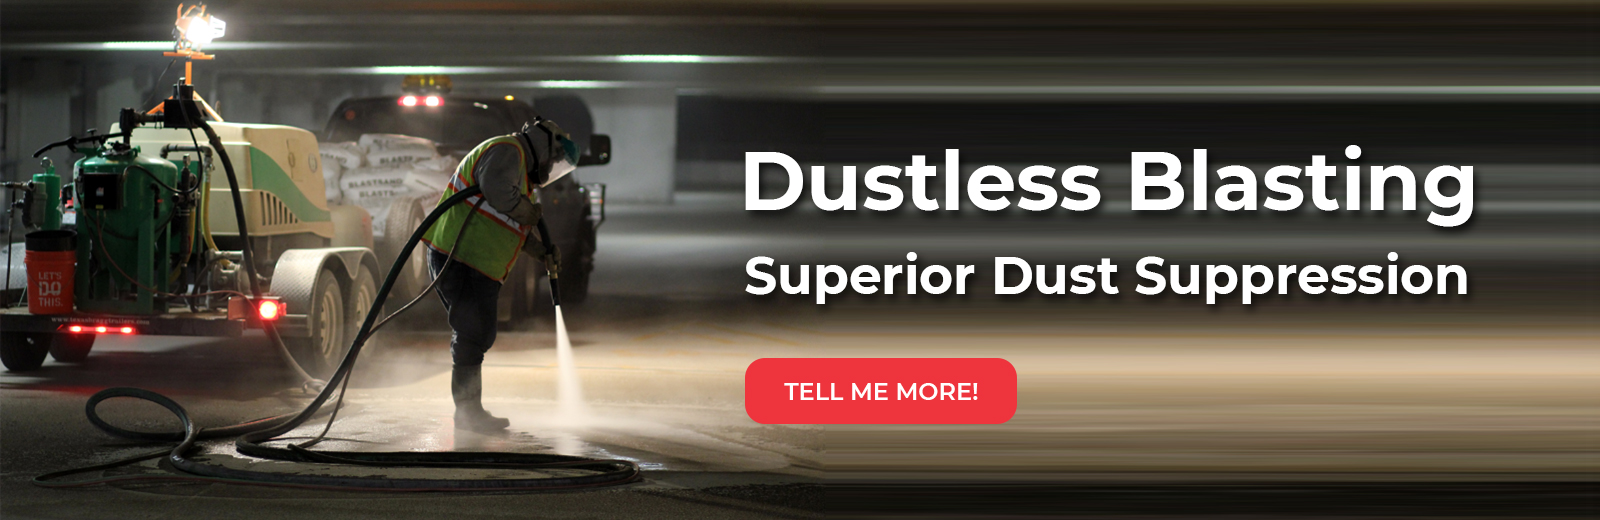 Dustless Blasting banner image with button